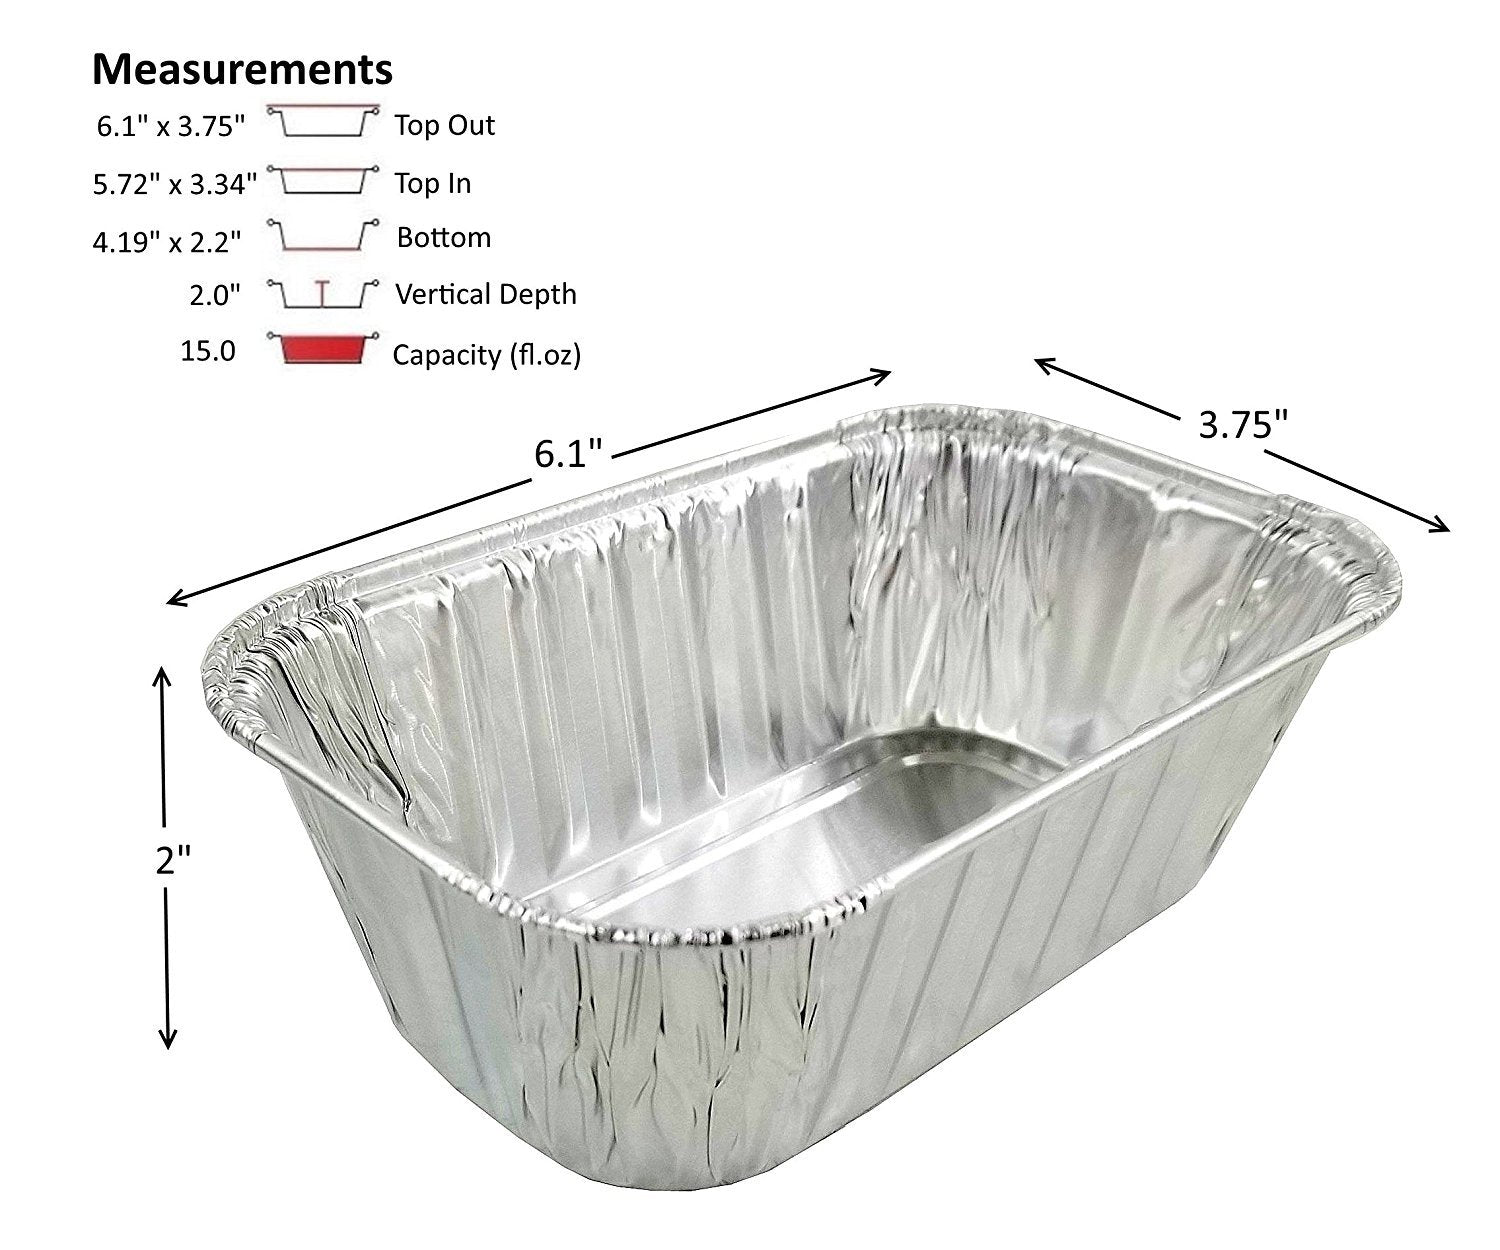 Choice 2 lb. Oblong Foil Take-Out Container with Dome Lid - 50/Pack